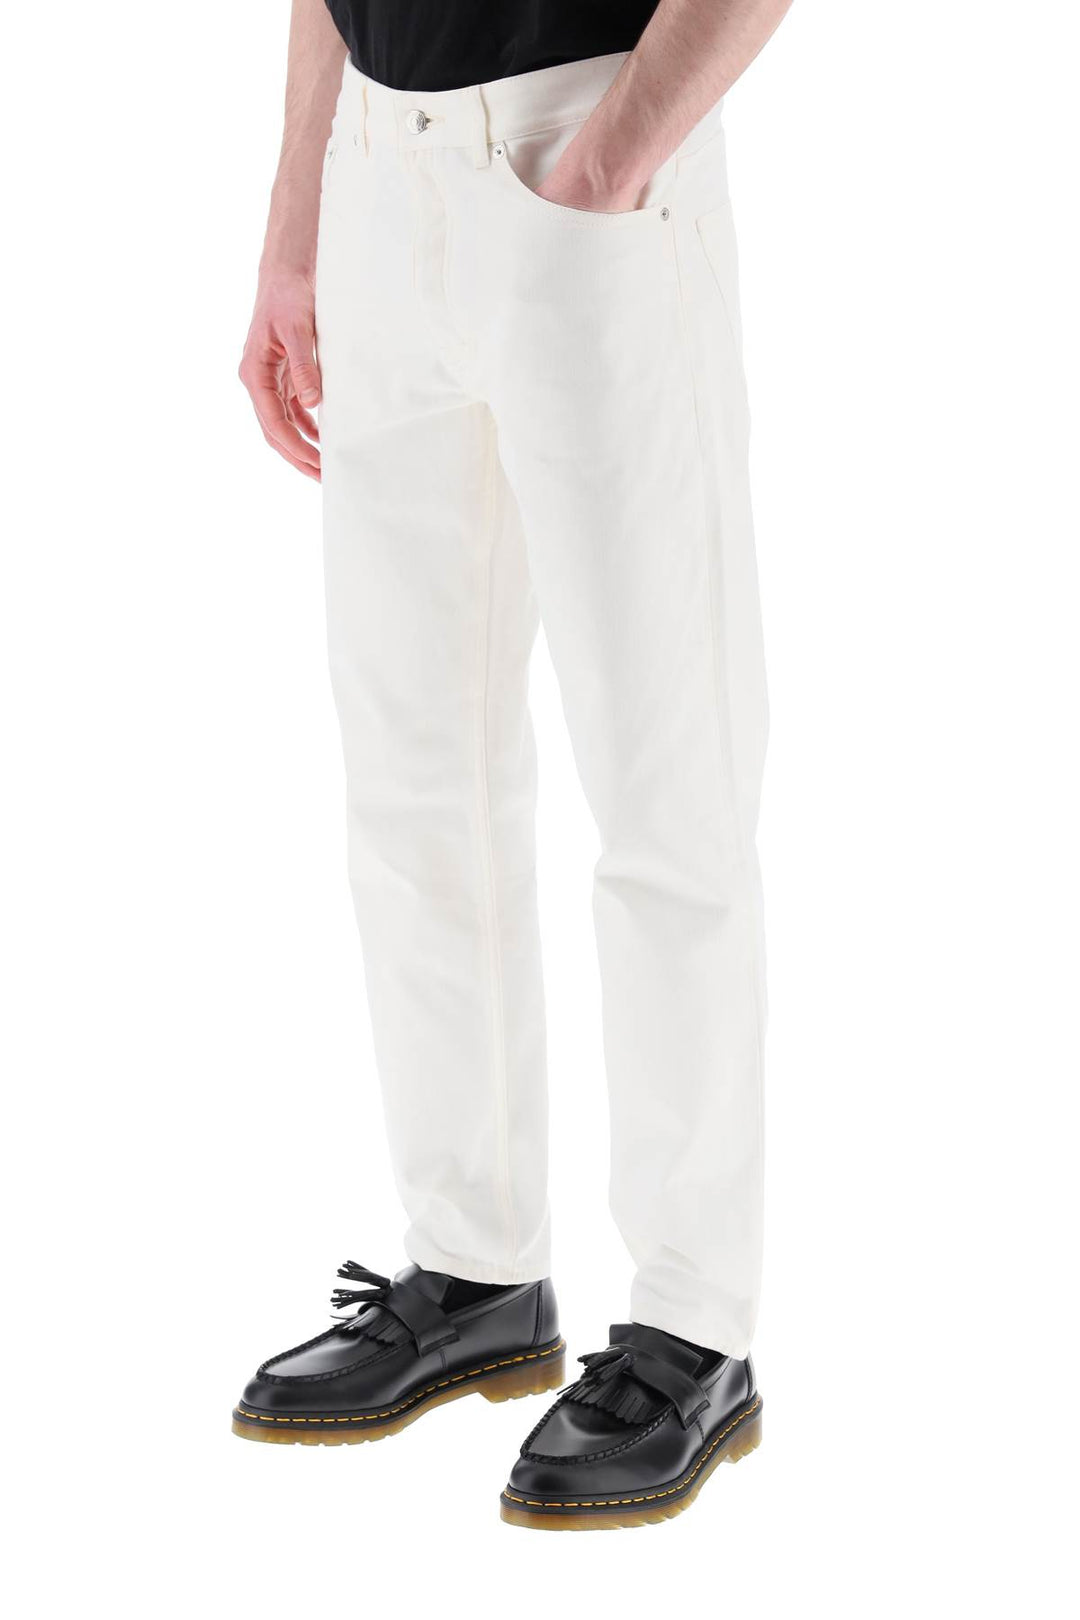 Maison Kitsune Low Rise Tapered Jeans   Bianco